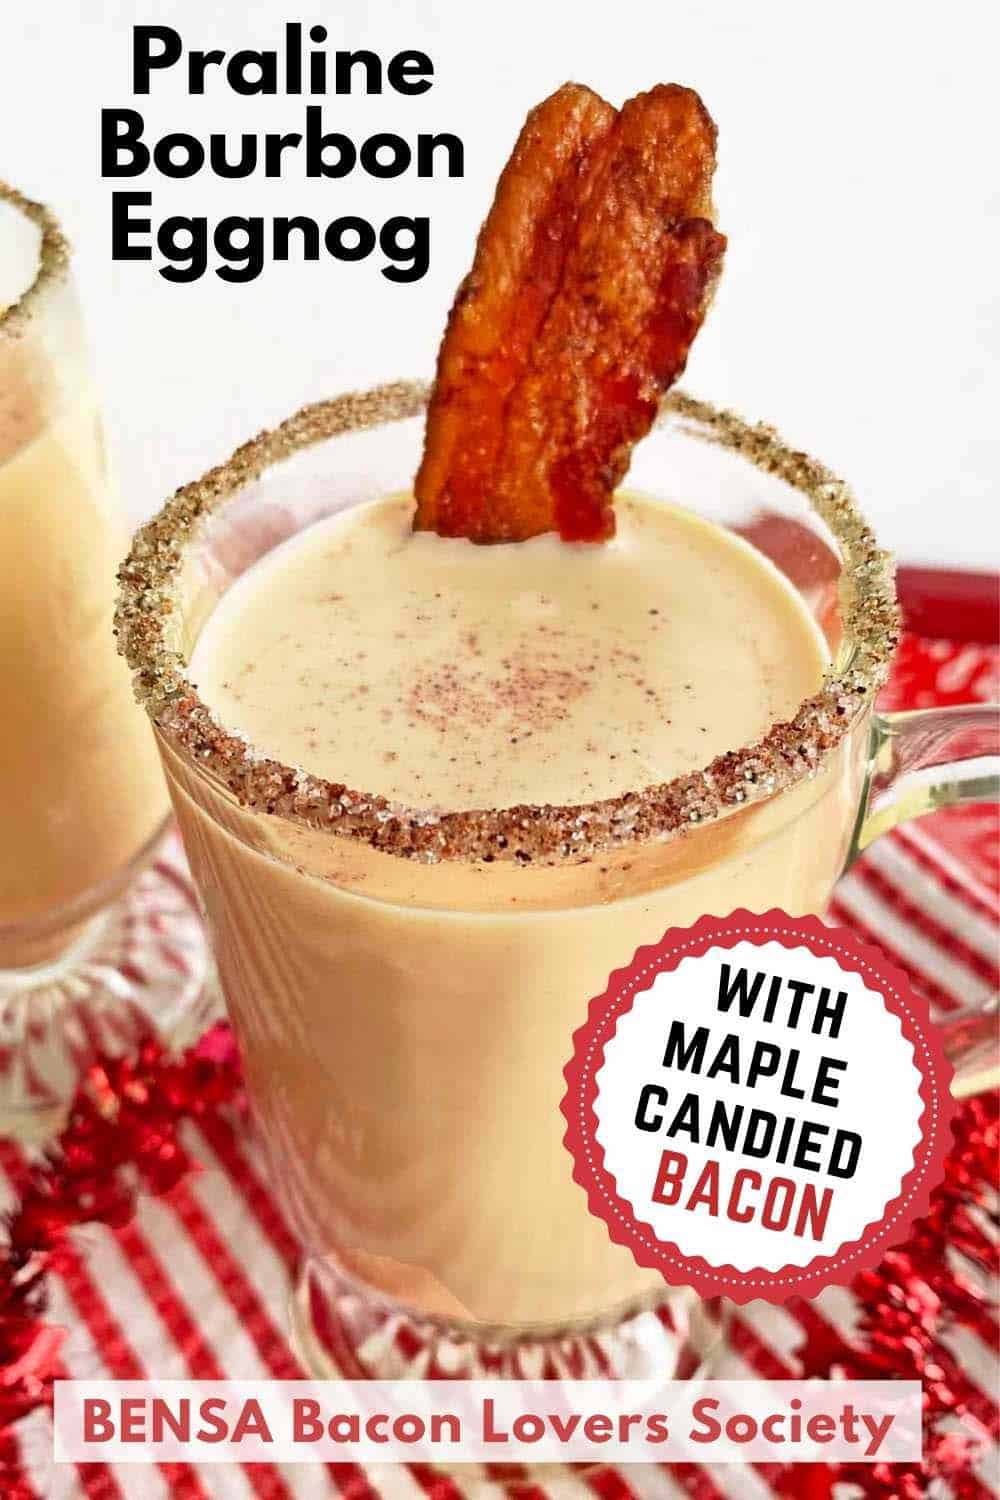 A Pinterest pin showing a mug of bourbon eggnog garnished with a strip of candied bacon